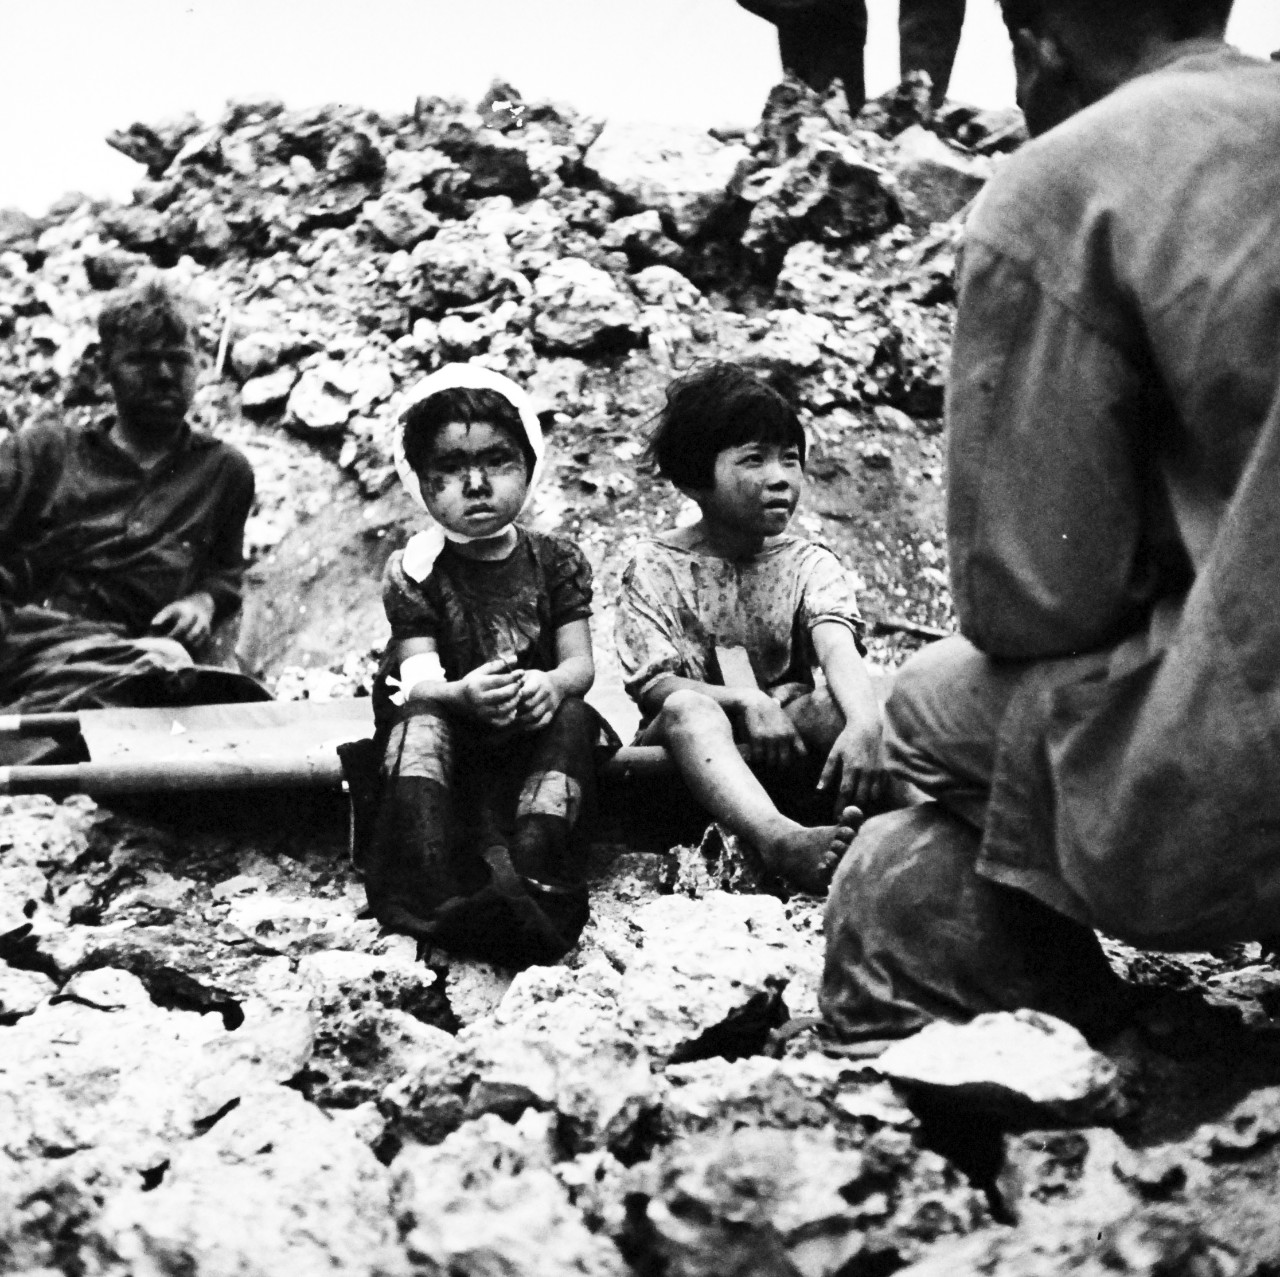 80-G-475136:  Invasion of Saipan, June-July 1944.  Two Japanese children answer questions of a U.S. Marine on Saipan.   Photographed by Lieutenant Paul Dorsey, July 1944, TR-10212.      Official U.S. Navy photograph, now in the collections of the National Archives.   (2017/03/15).